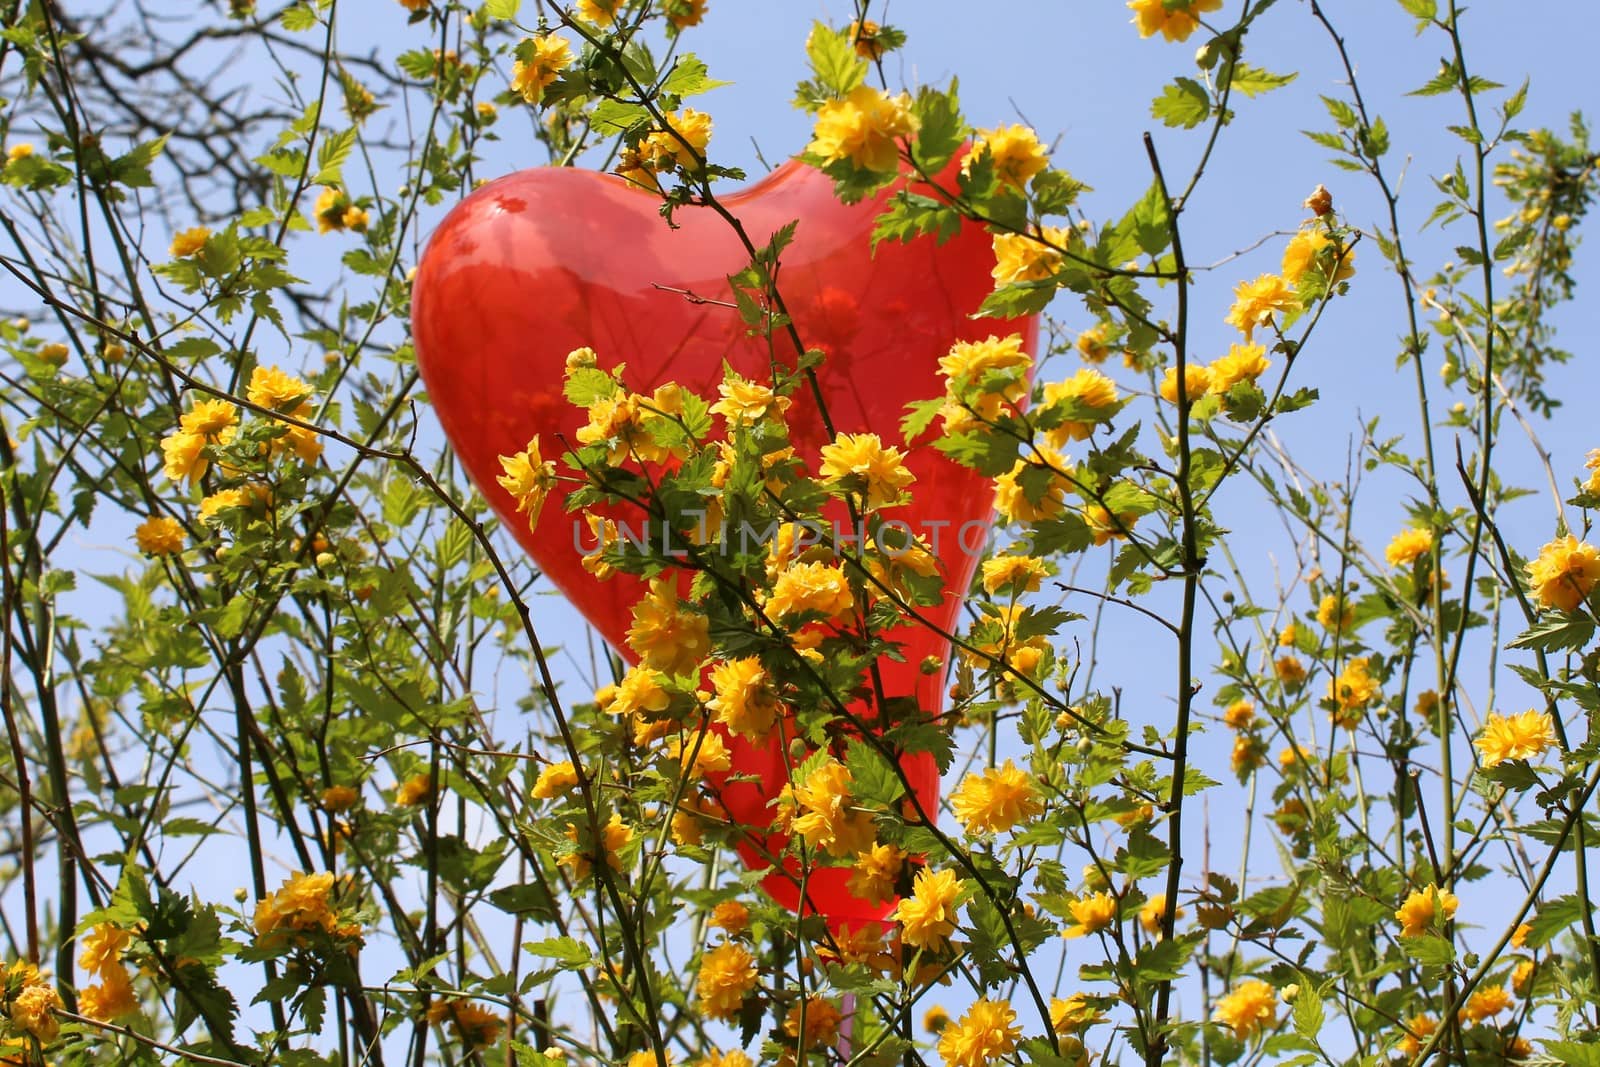 The picture shows a red heart balloon in the kerria